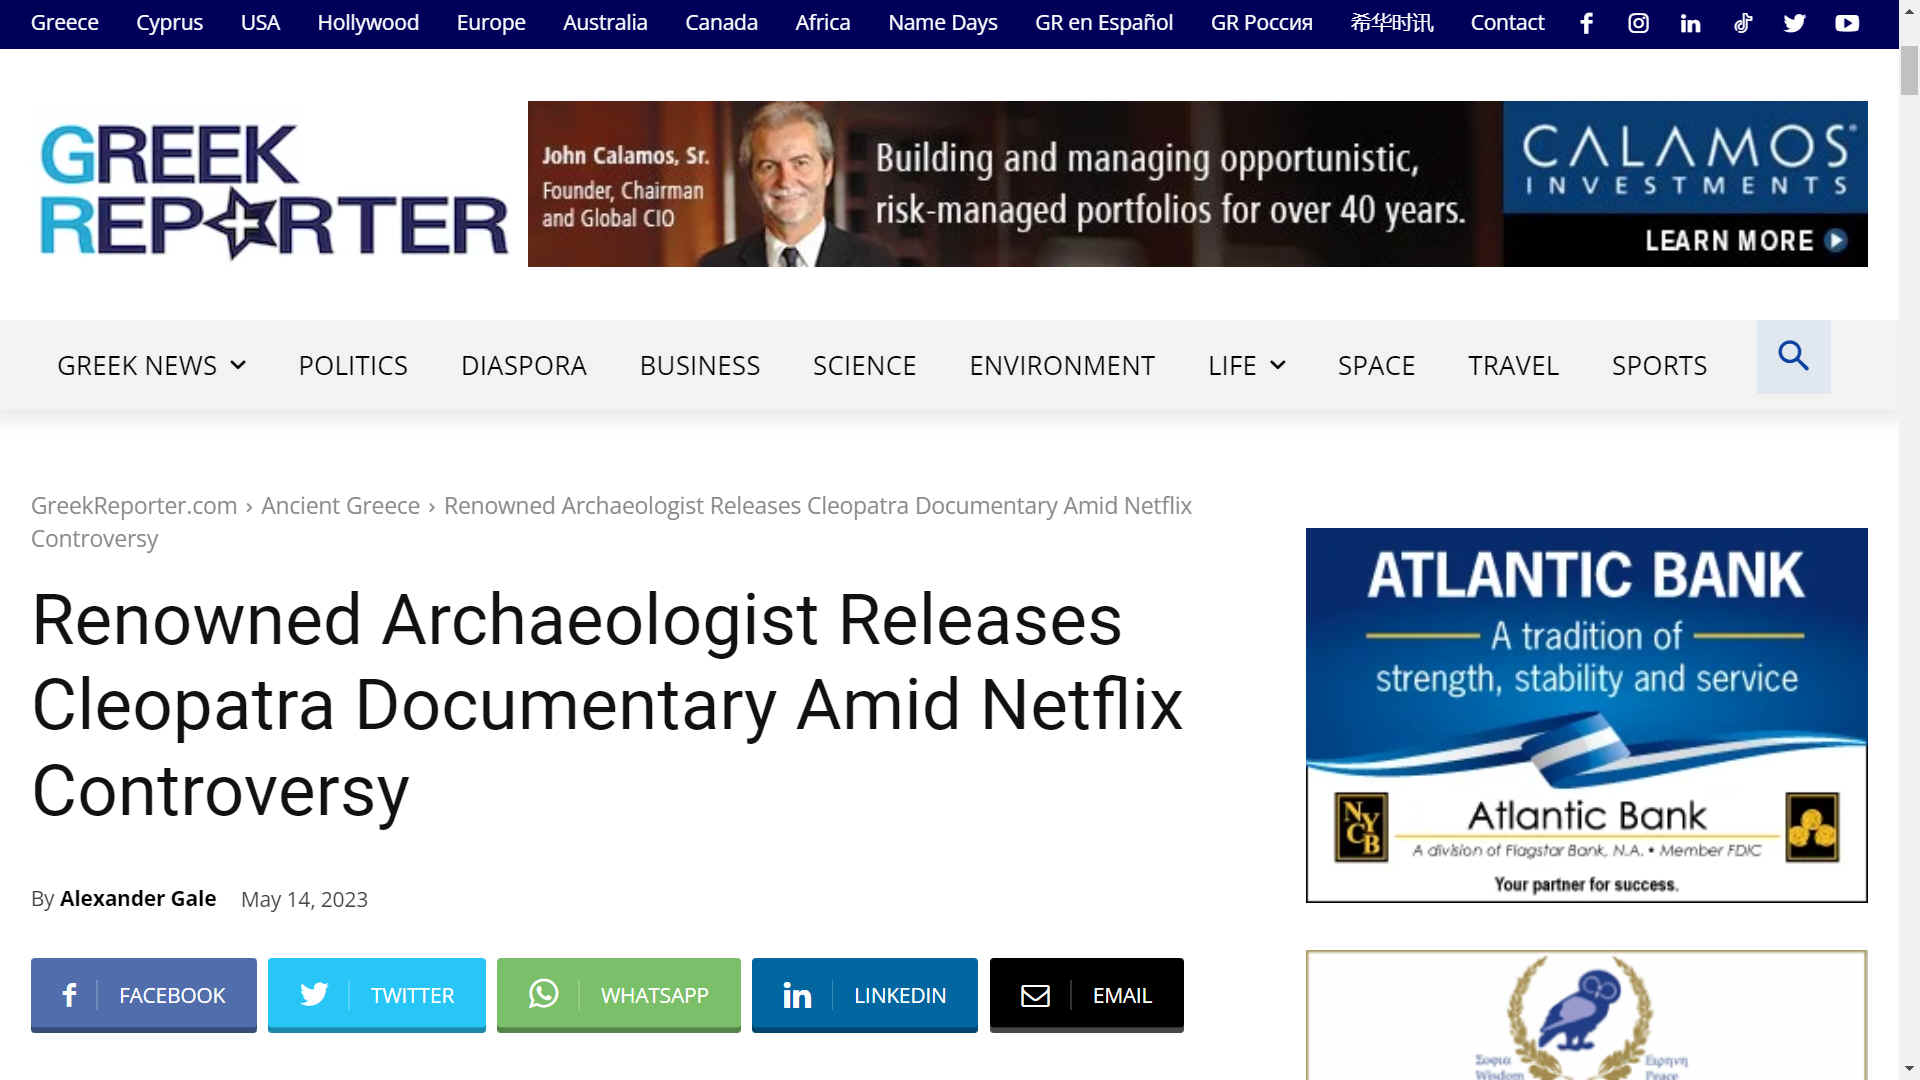 Greek Reporter 10 May 2023 - Renowned archaeologist releases Cleopatra documentary amid Netflix controversy